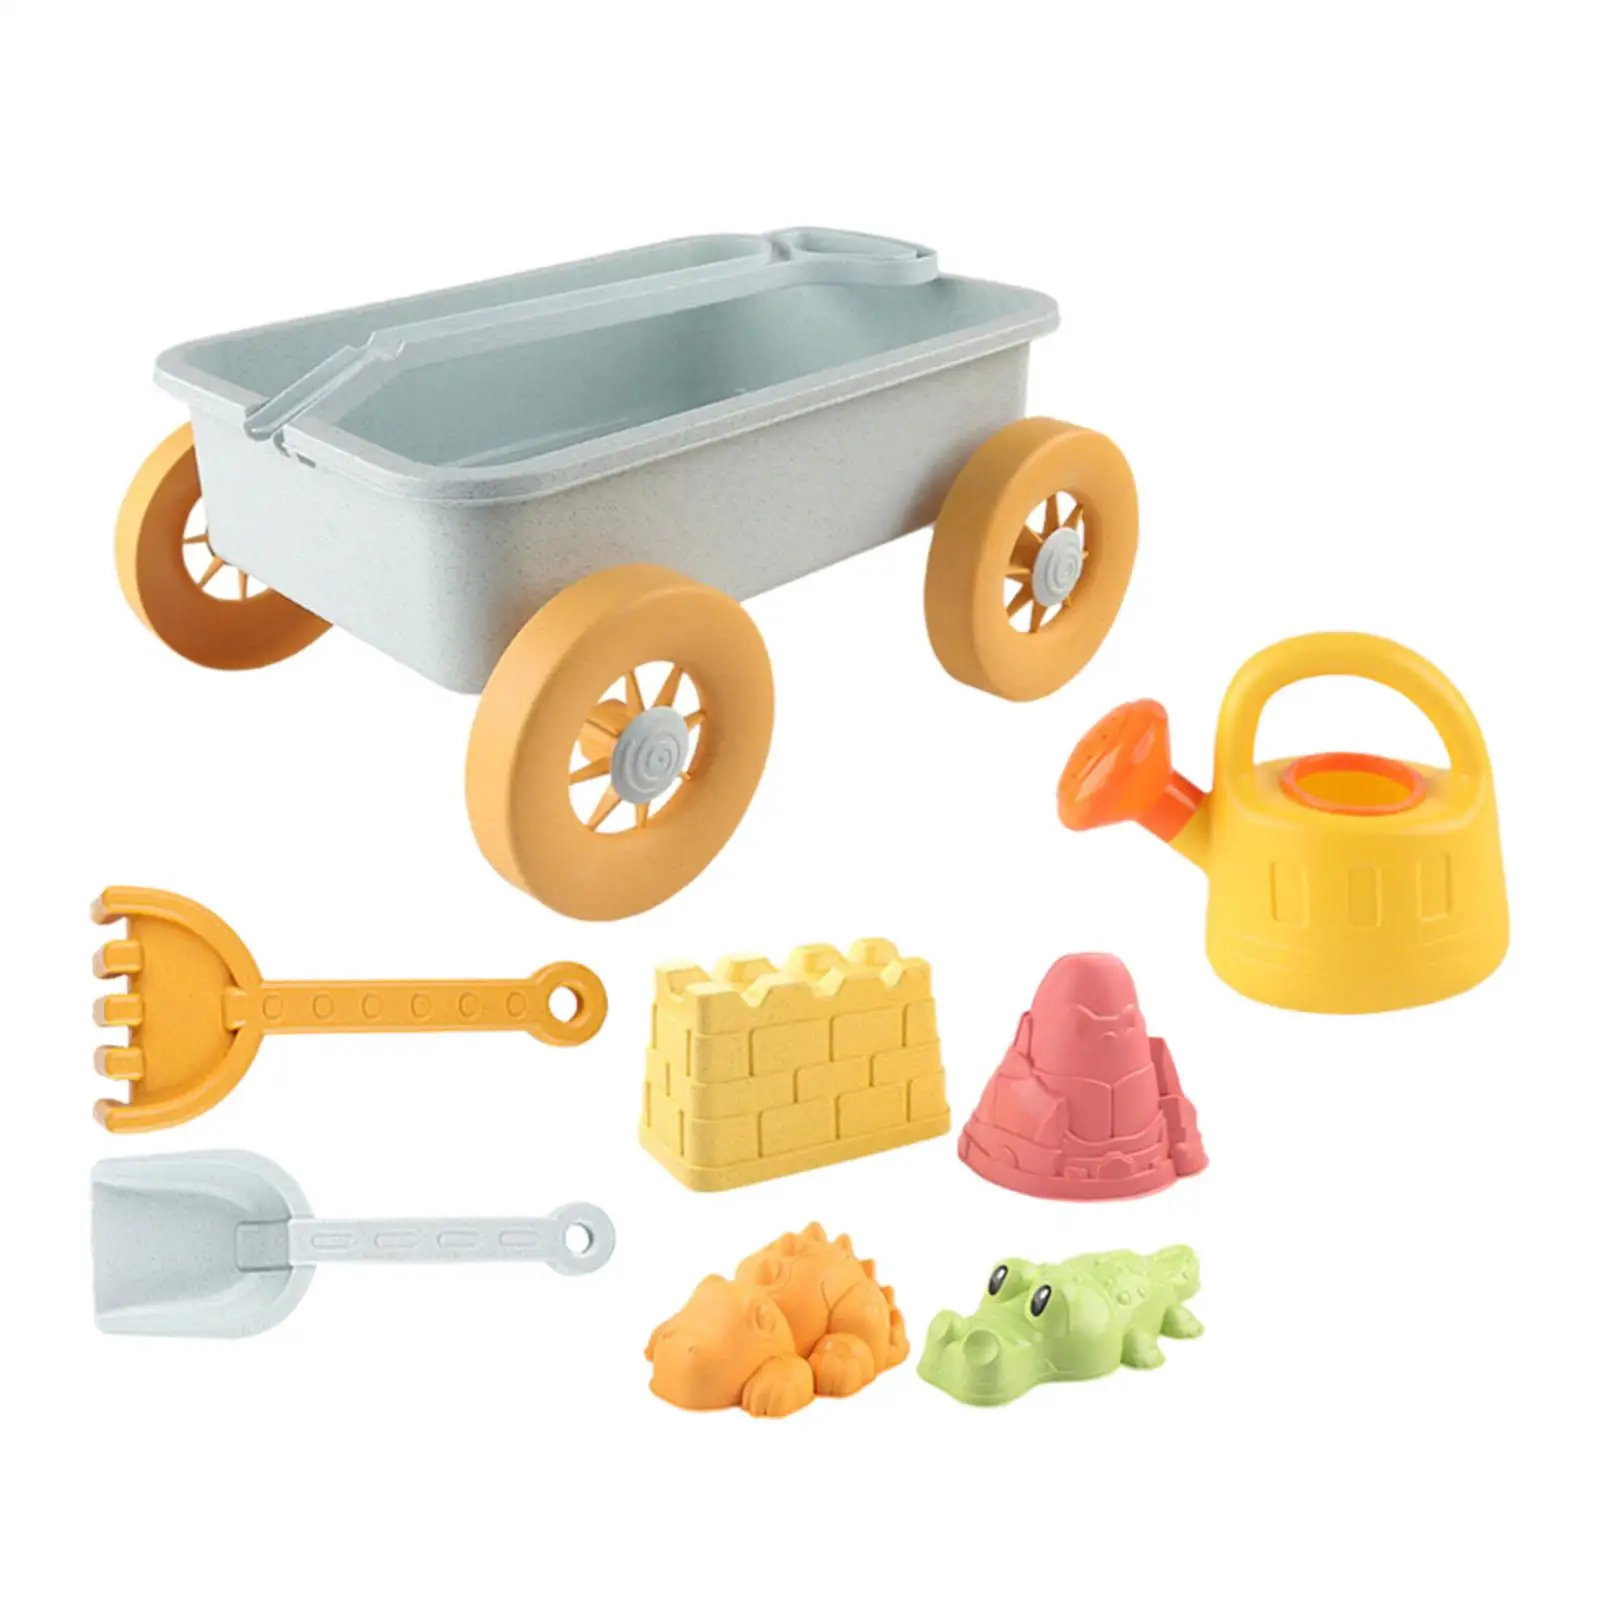 8Pcs Beach Toys Sand Set Outdoor Beach Playset Summer Sandpit Toy Sand Trolley for Party Birthday Backyard Garden Boys and Girls